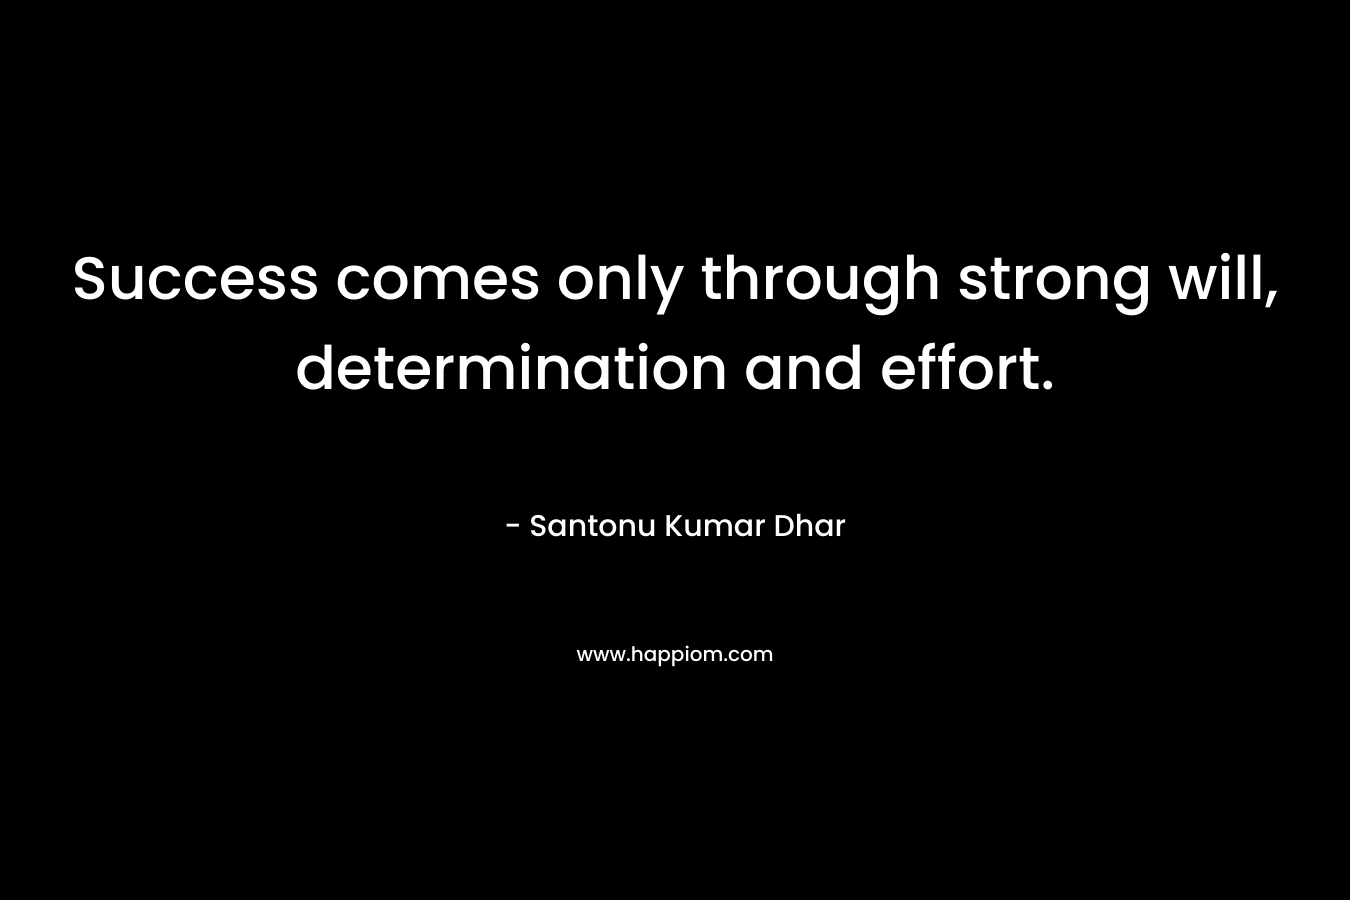 Success comes only through strong will, determination and effort. – Santonu Kumar Dhar